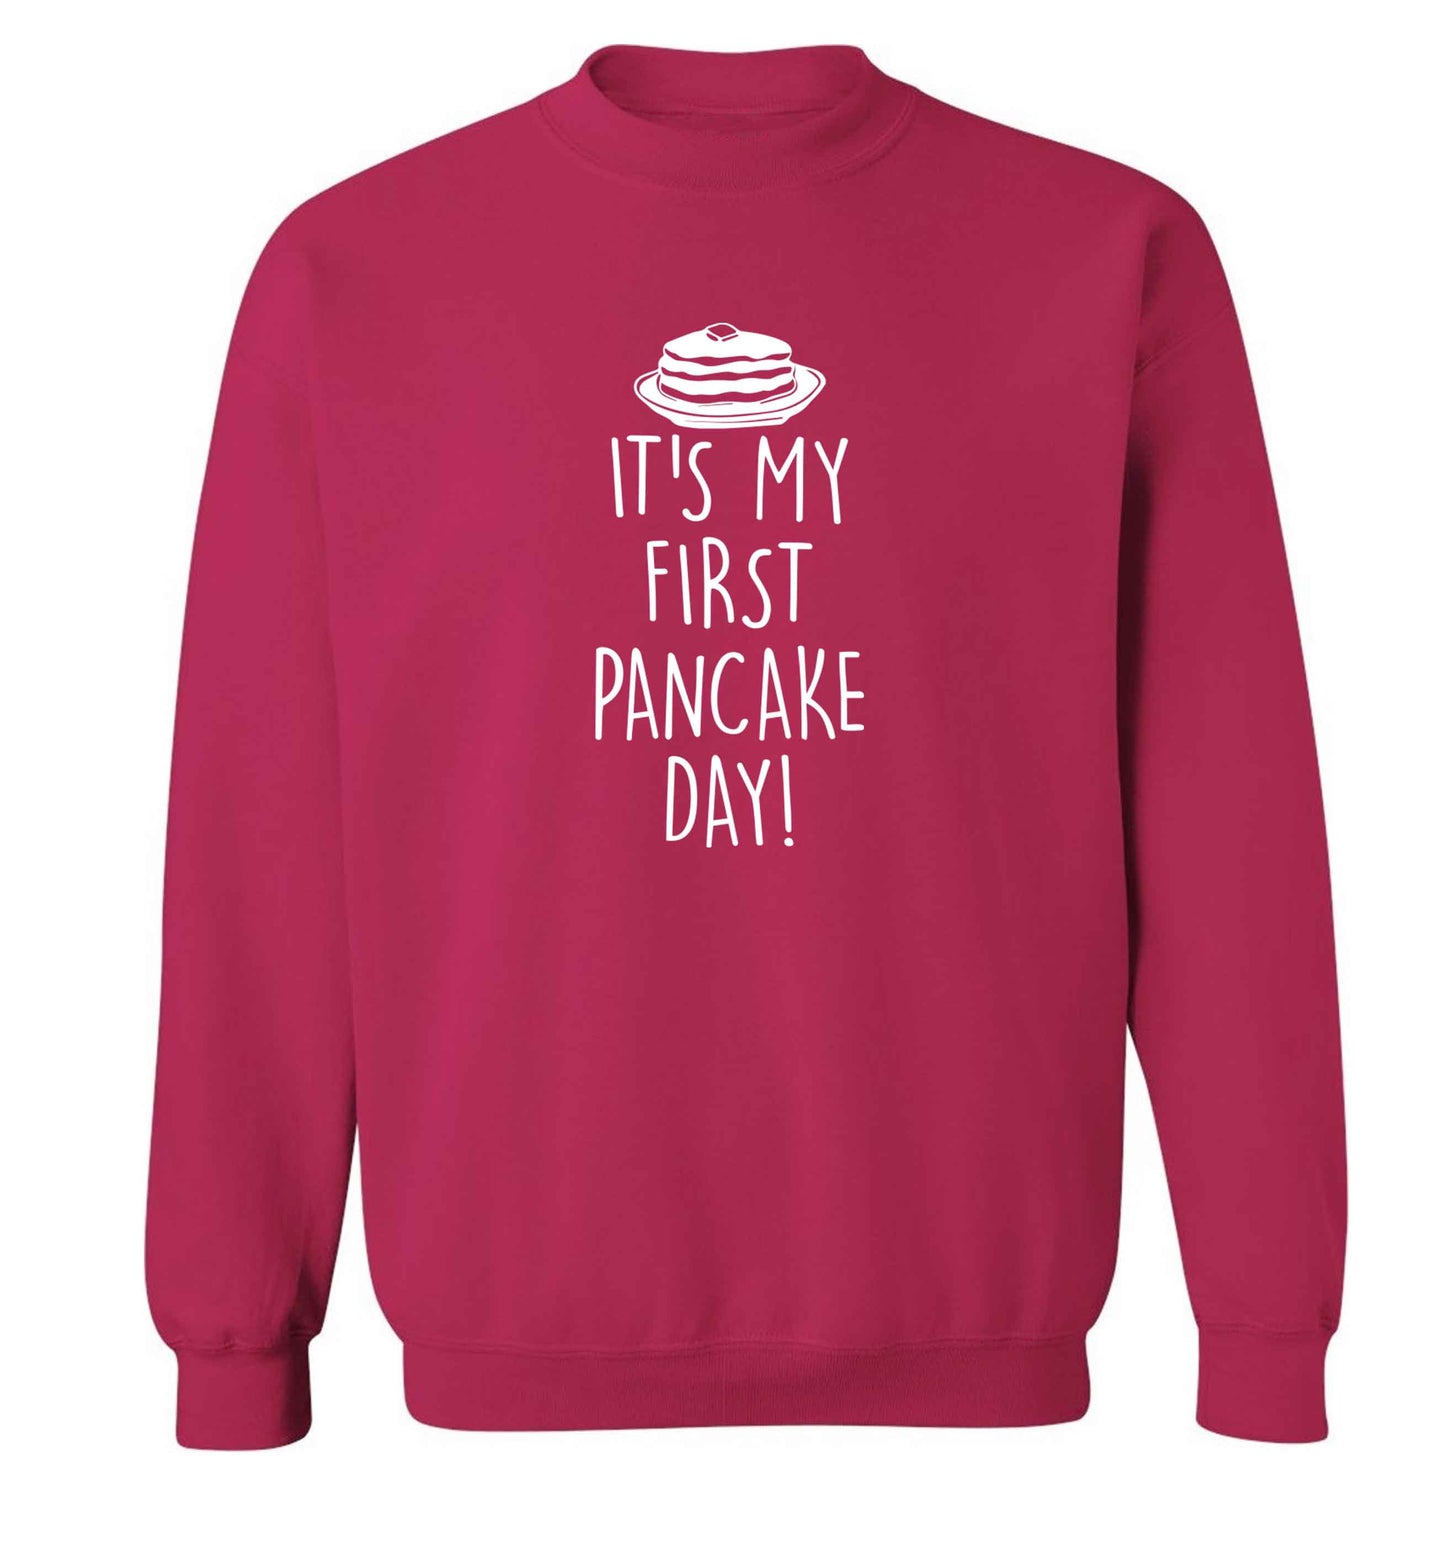 It's my first pancake day adult's unisex pink sweater 2XL